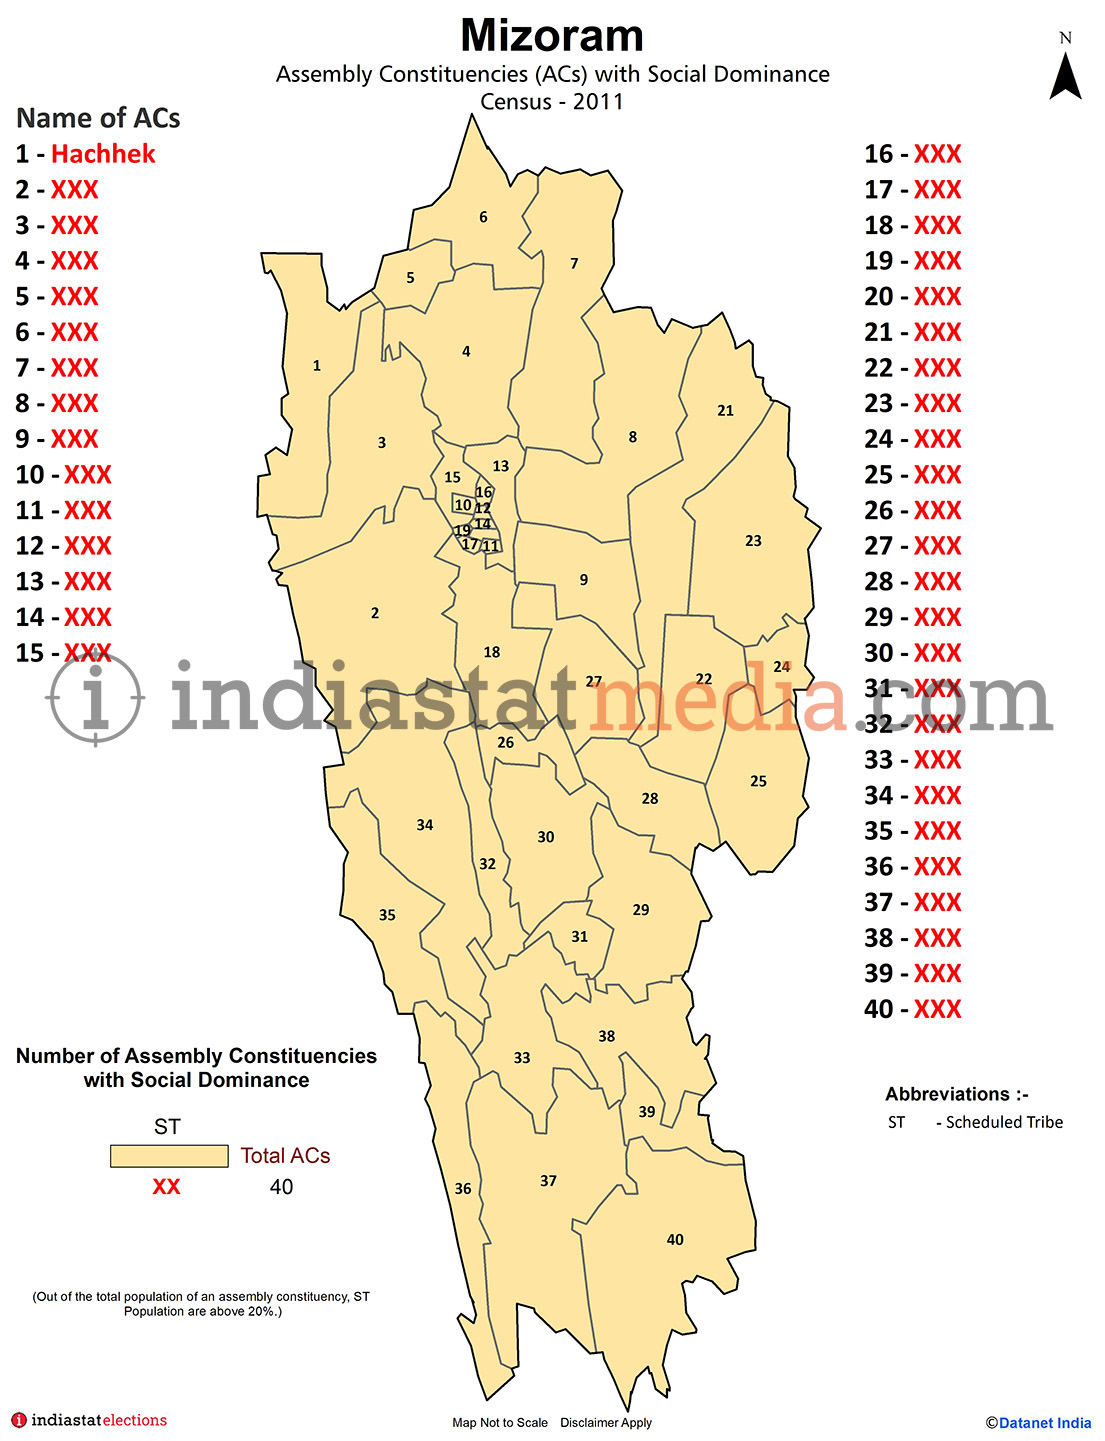 Assembly Constituencies with Social Dominance in Mizoram - Census 2011